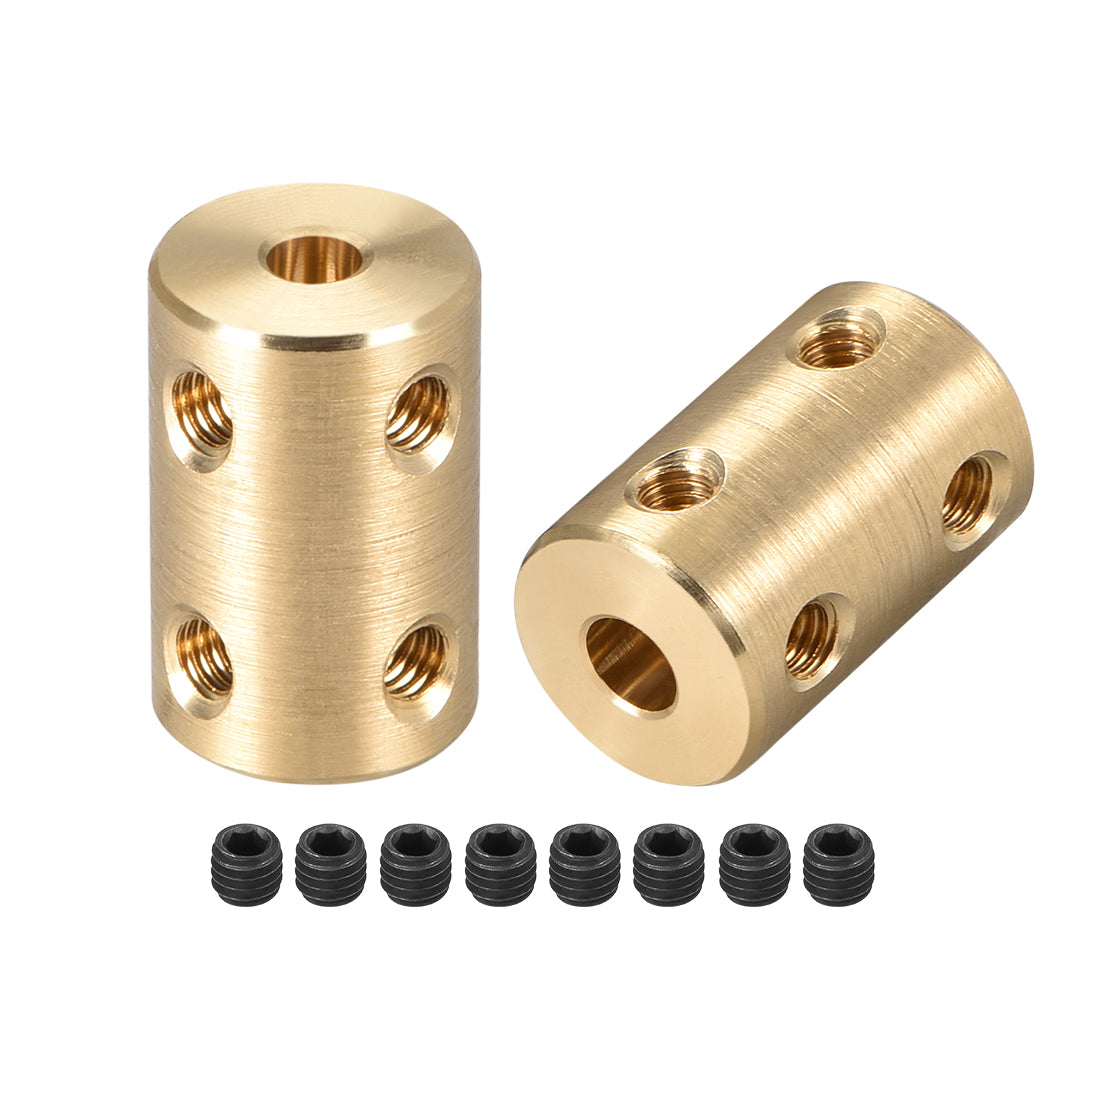 uxcell Uxcell Shaft Coupling 4mm to 5mm Bore L22xD14 Robot Motor Wheel Rigid Coupler Connector Gold Tone 2PCS